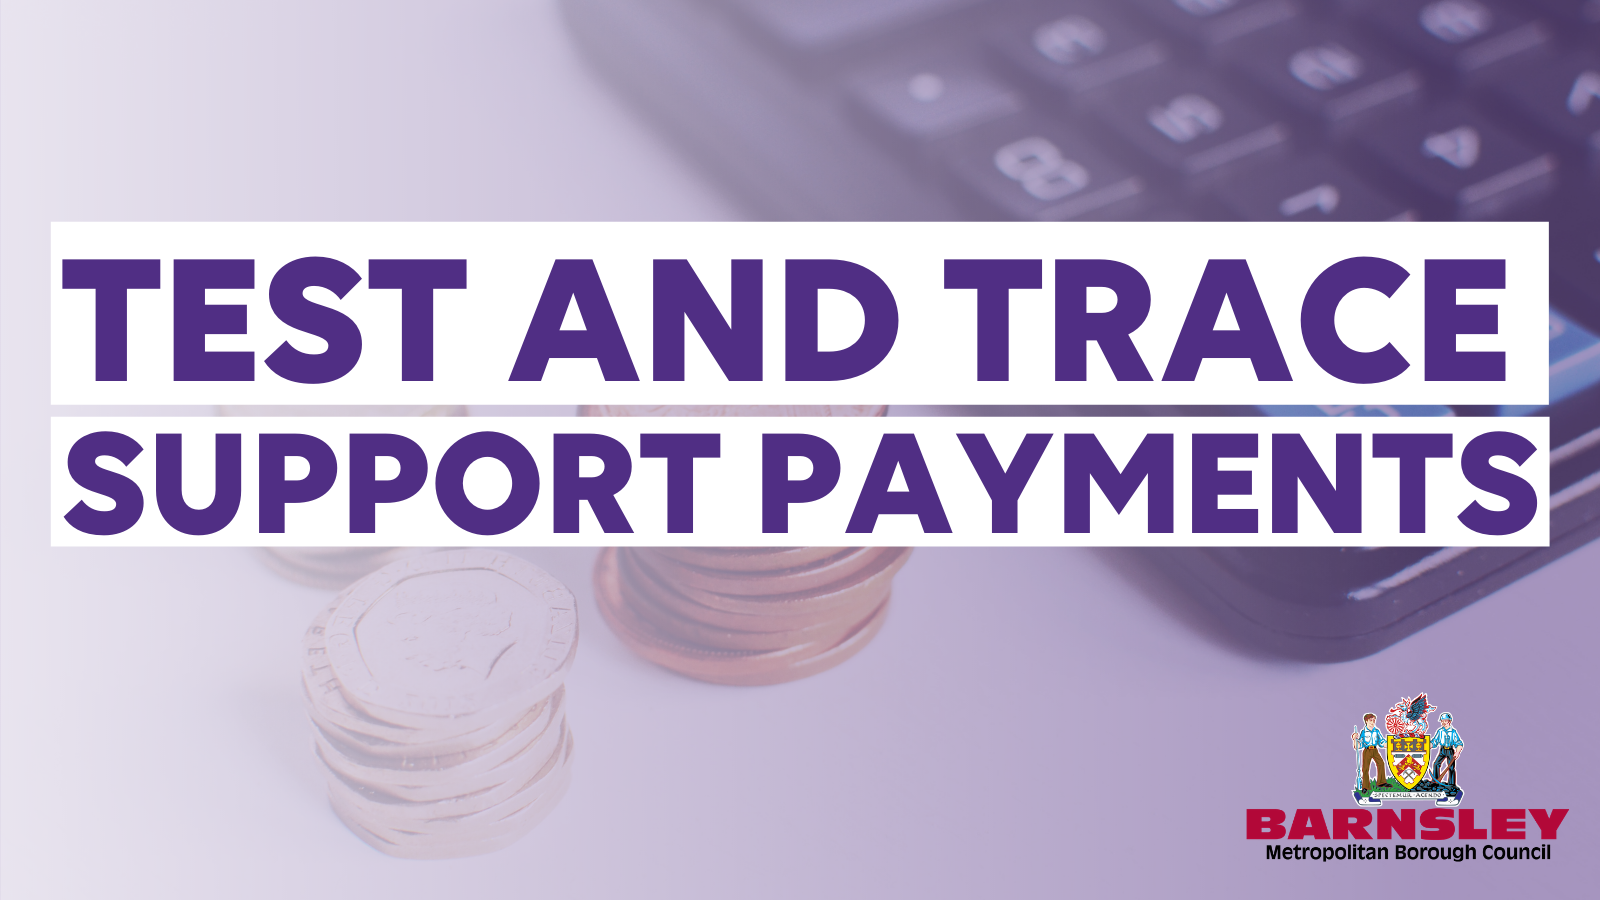 Test and trace support payments